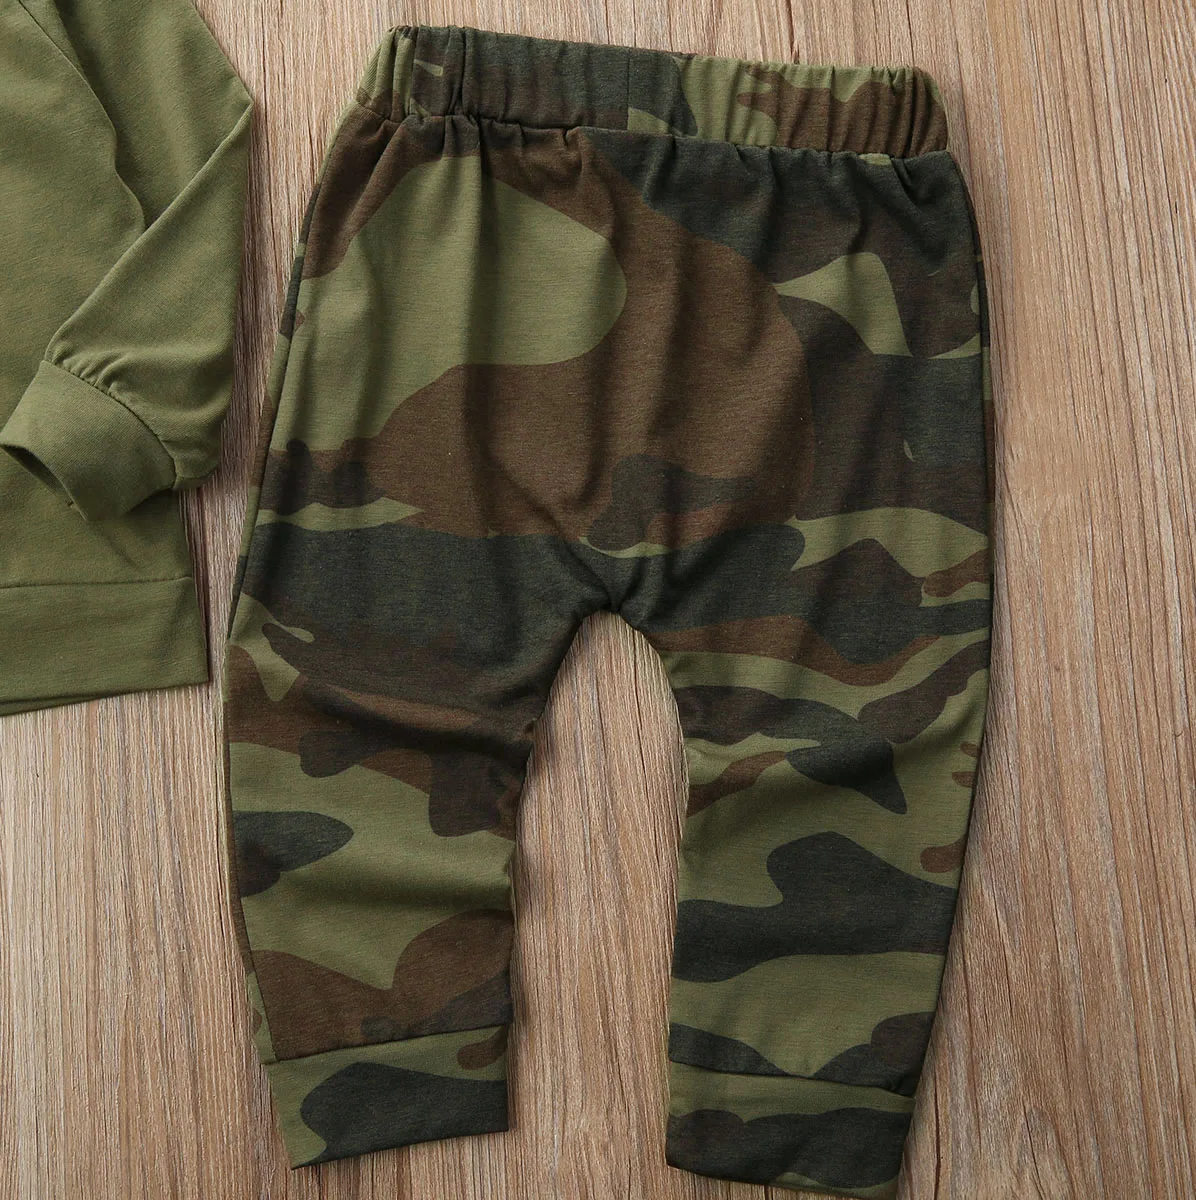 Newborn Baby Boy Girls Clothes Long Sleeve Army Green T-shirt Hooded Tops + Camouflage Pants Autumn Casual Outfit 0-24 M images - 6